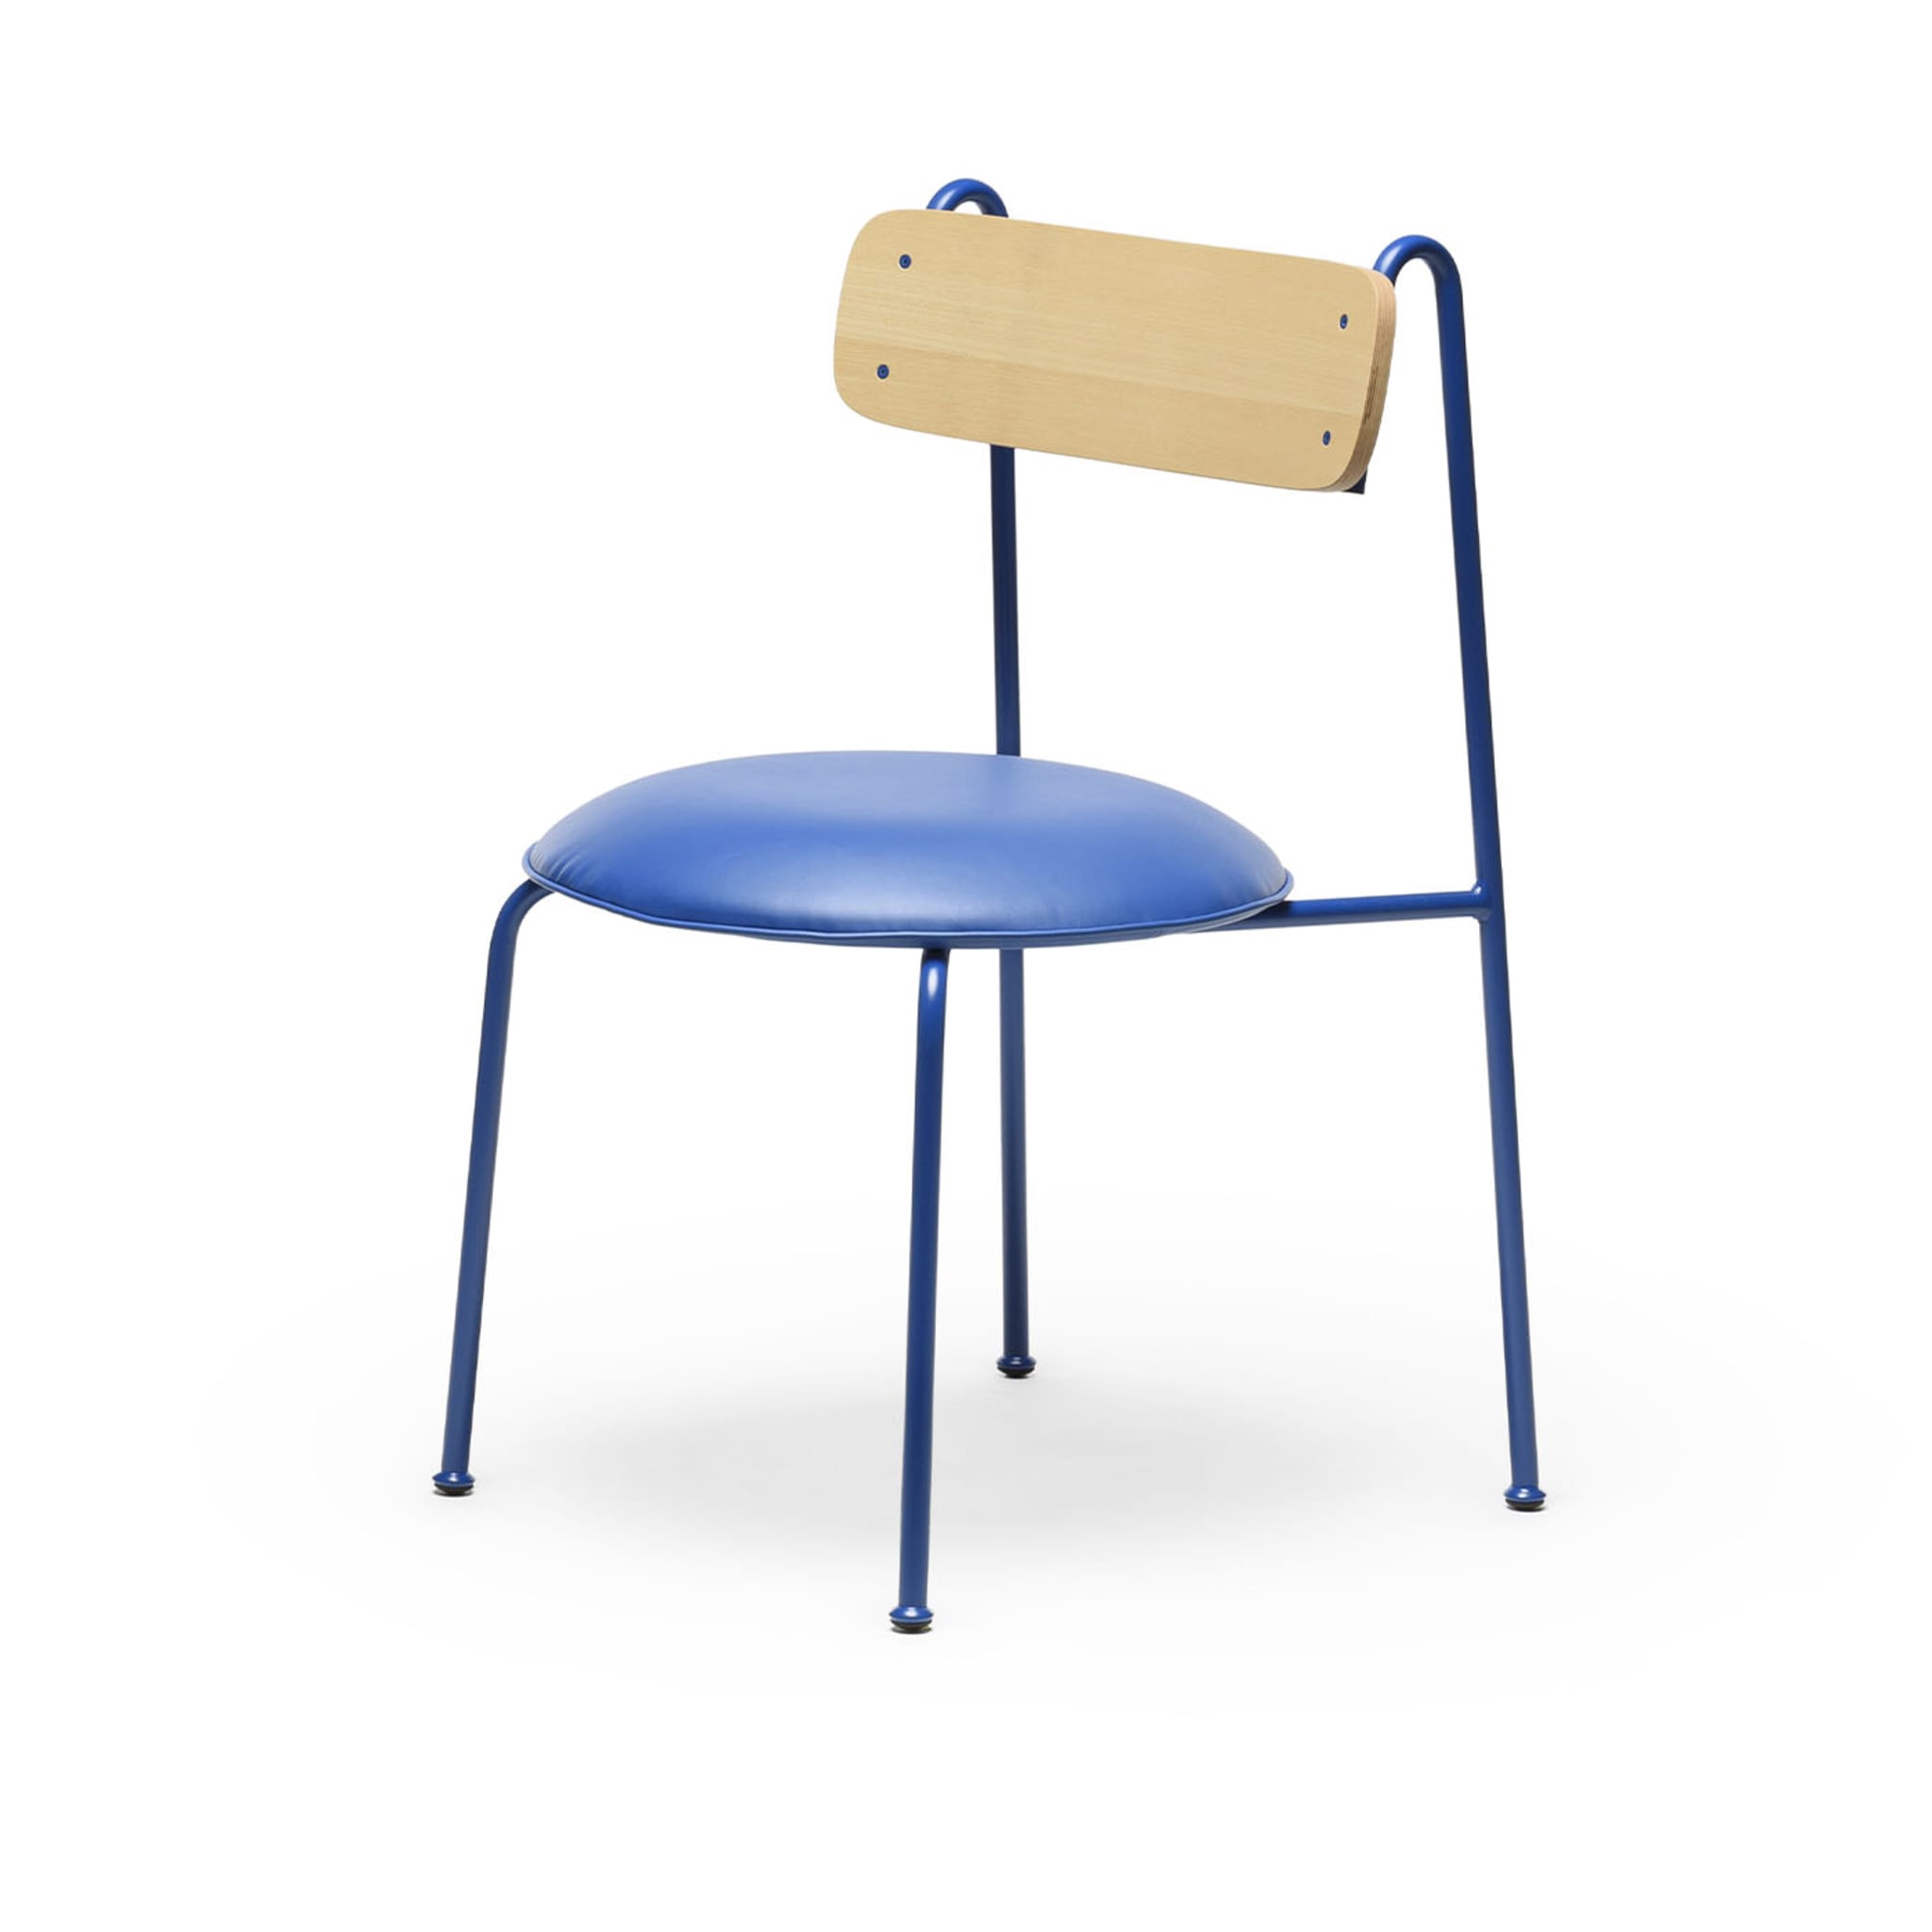 Lena S Blue And Natural Ash Chair By Designerd - Alternative view 3